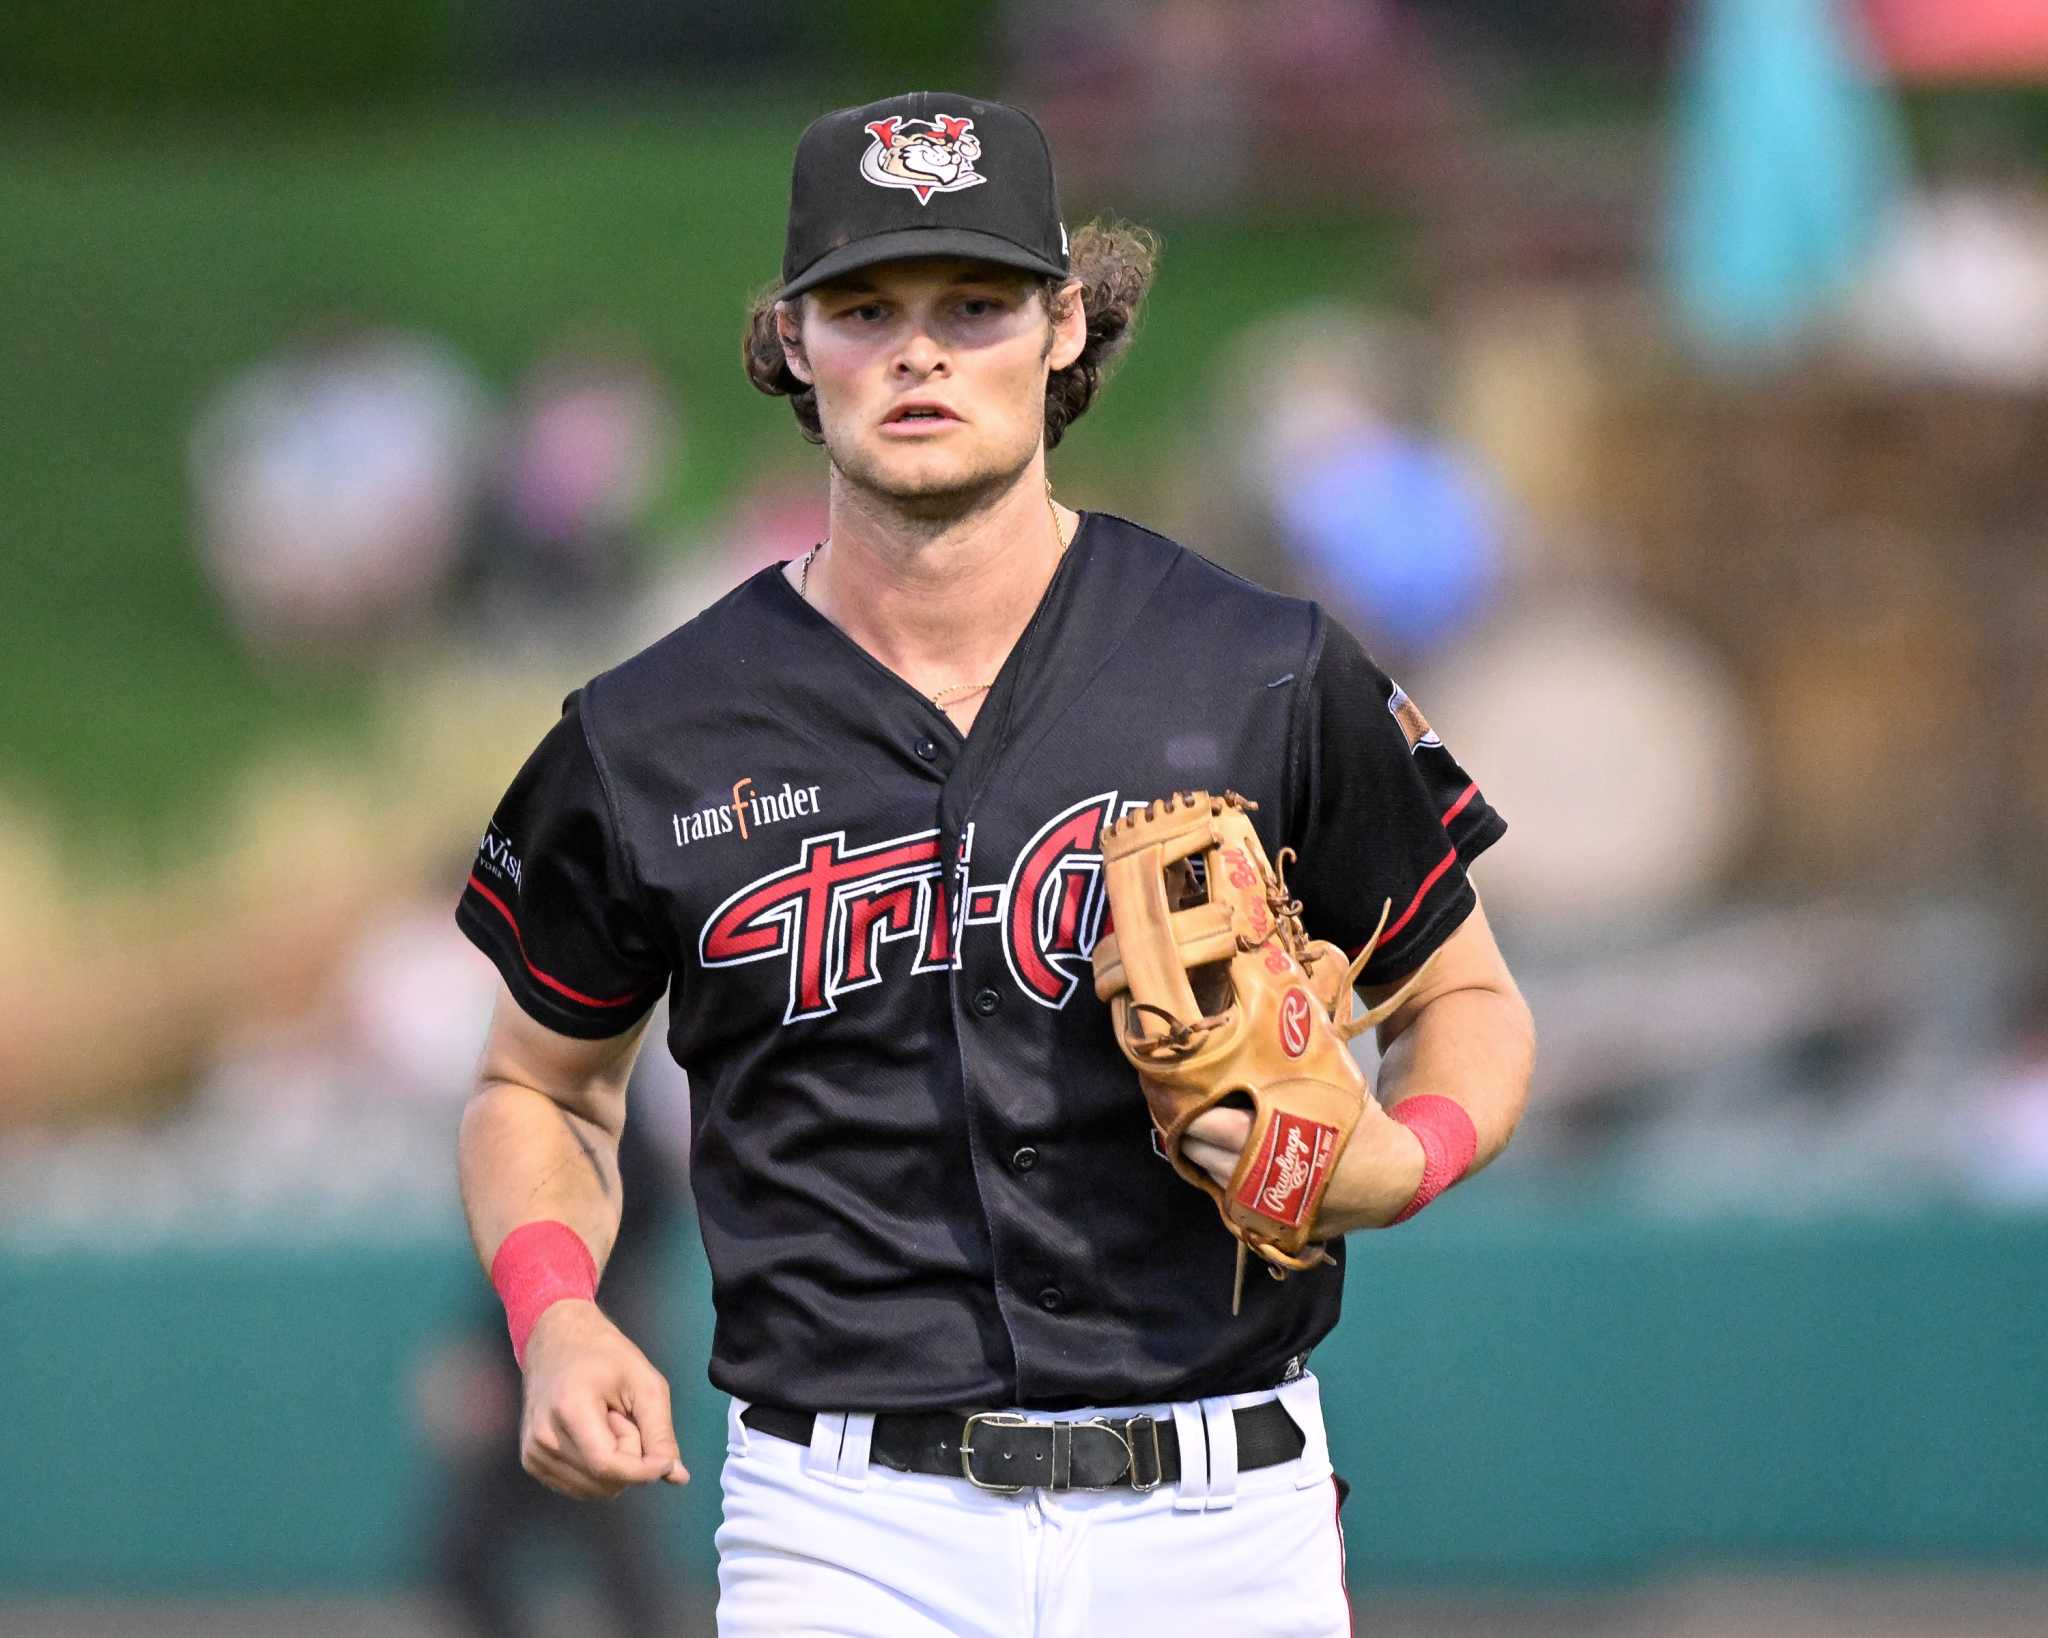 ValleyCats' Brantley Bell signs with Padres' organization